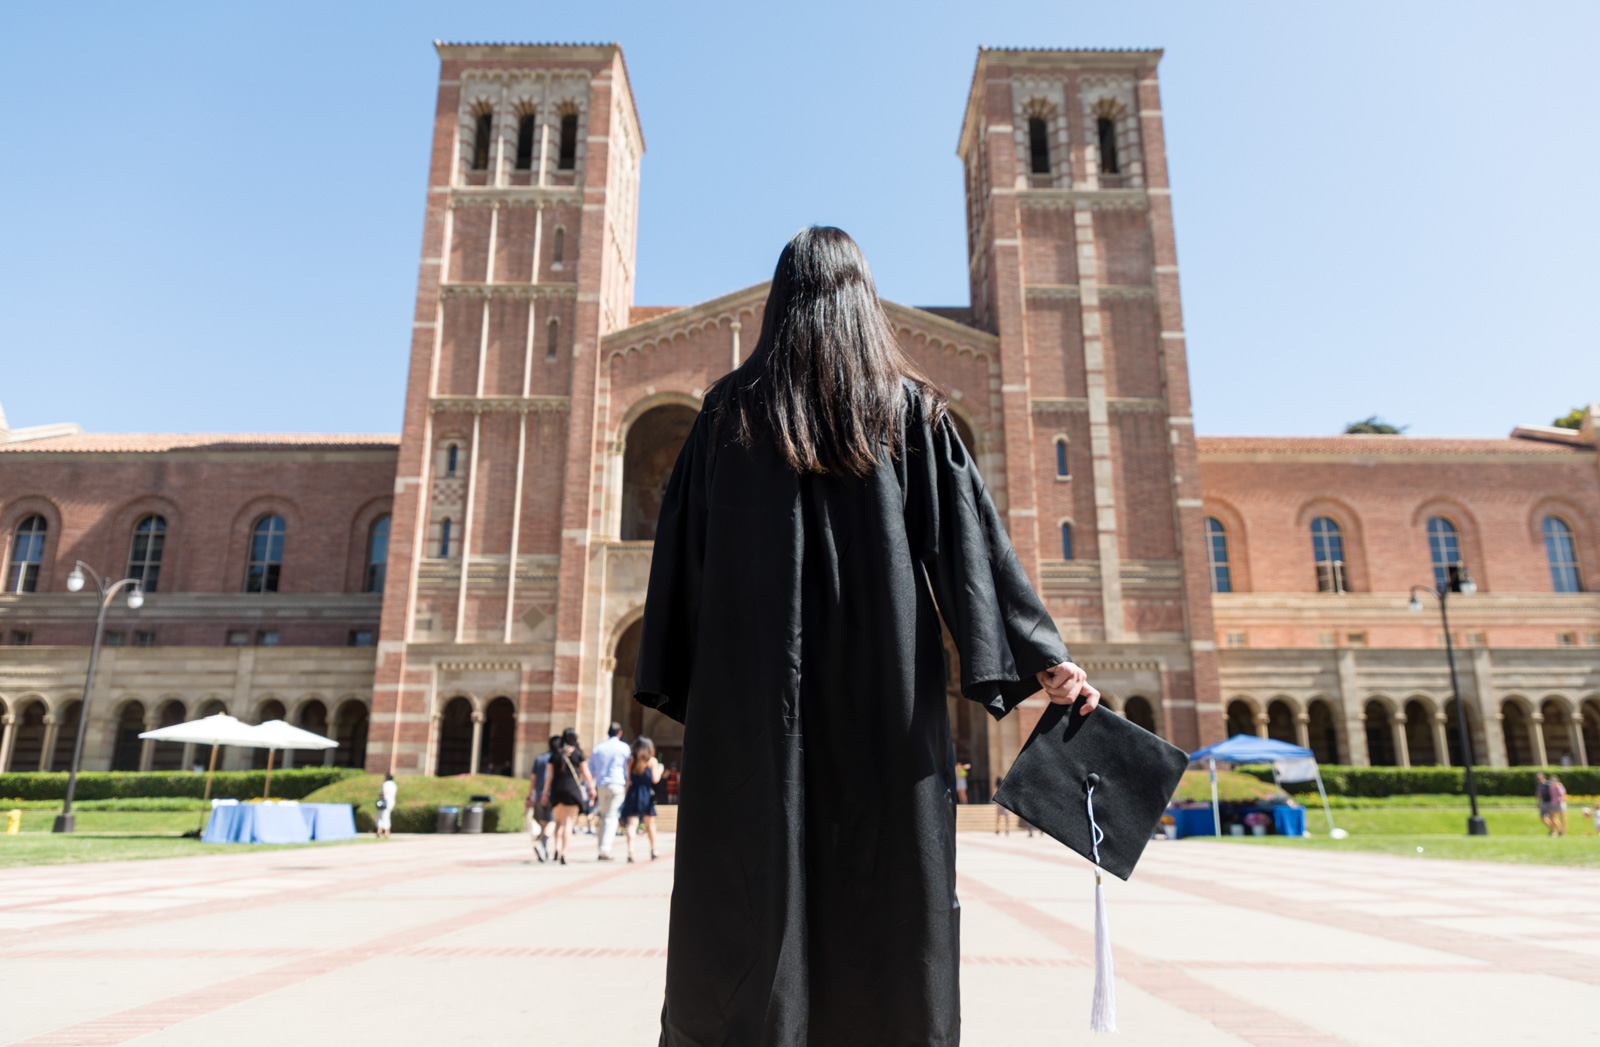 UCLA moves spring graduation ceremonies online to curb spread of COVID